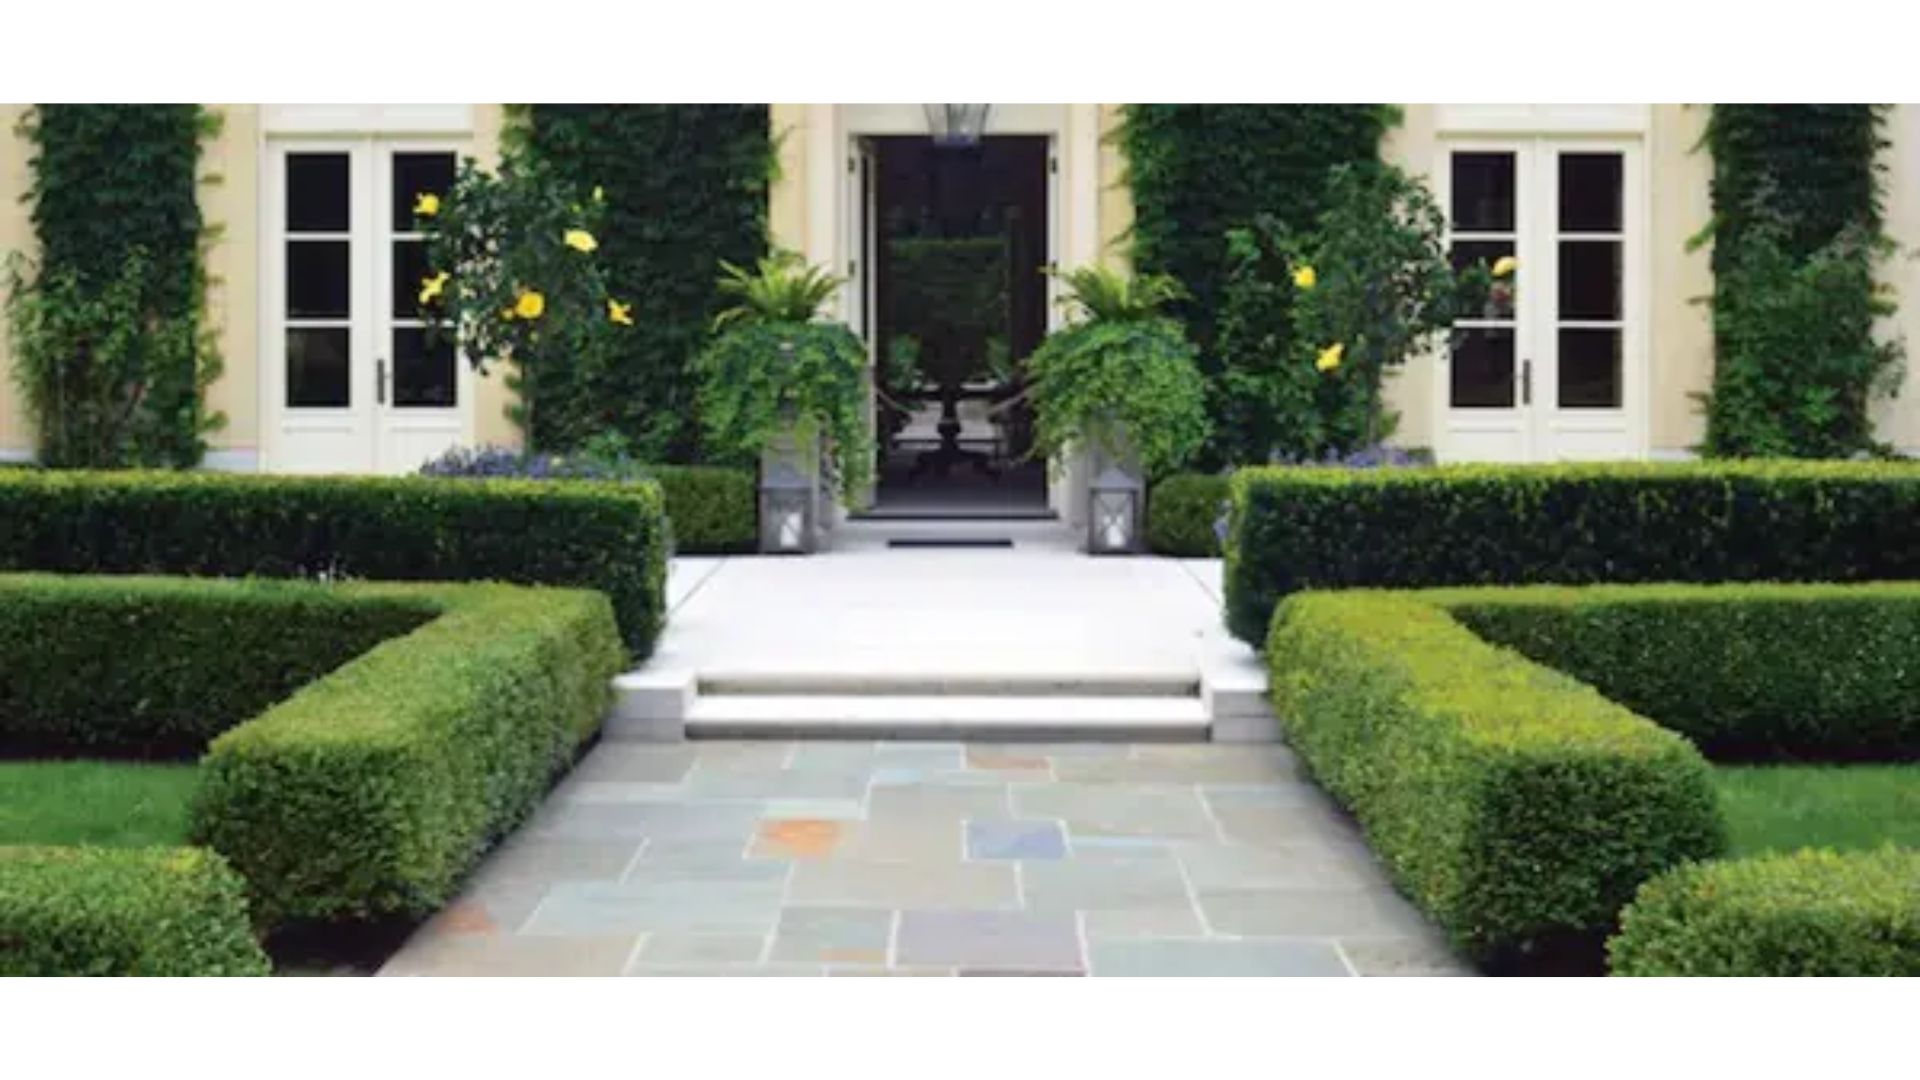 Landscaping should lead your guests to the front door.